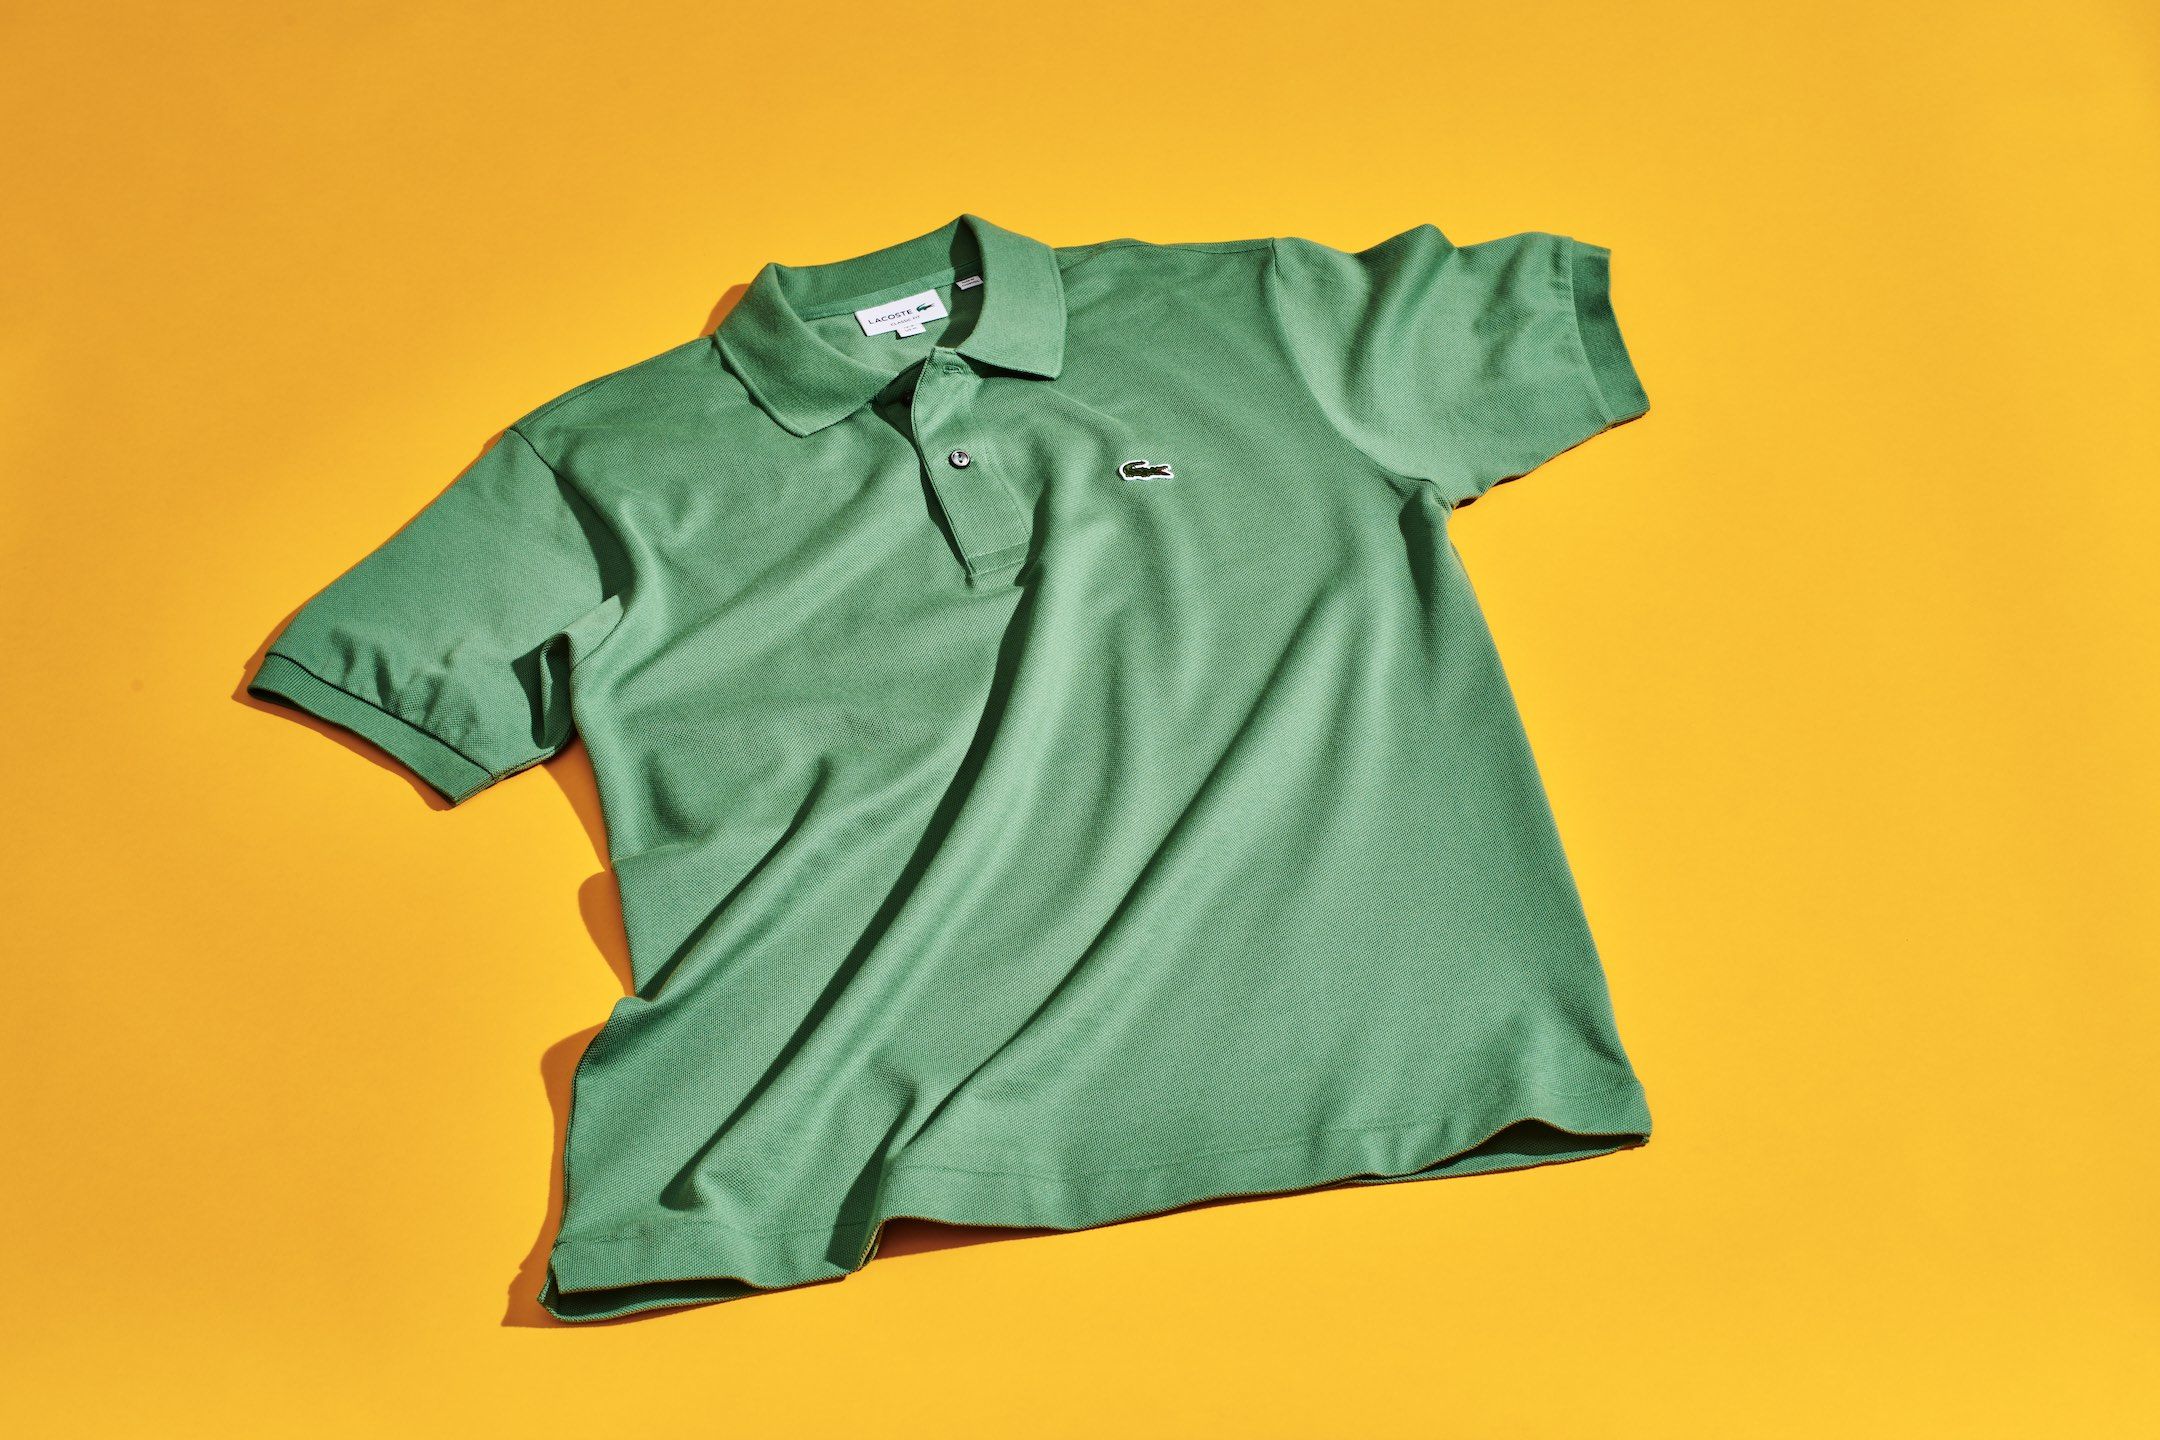 Lacoste Classic Short Sleeve Polo Shirt Review Pique